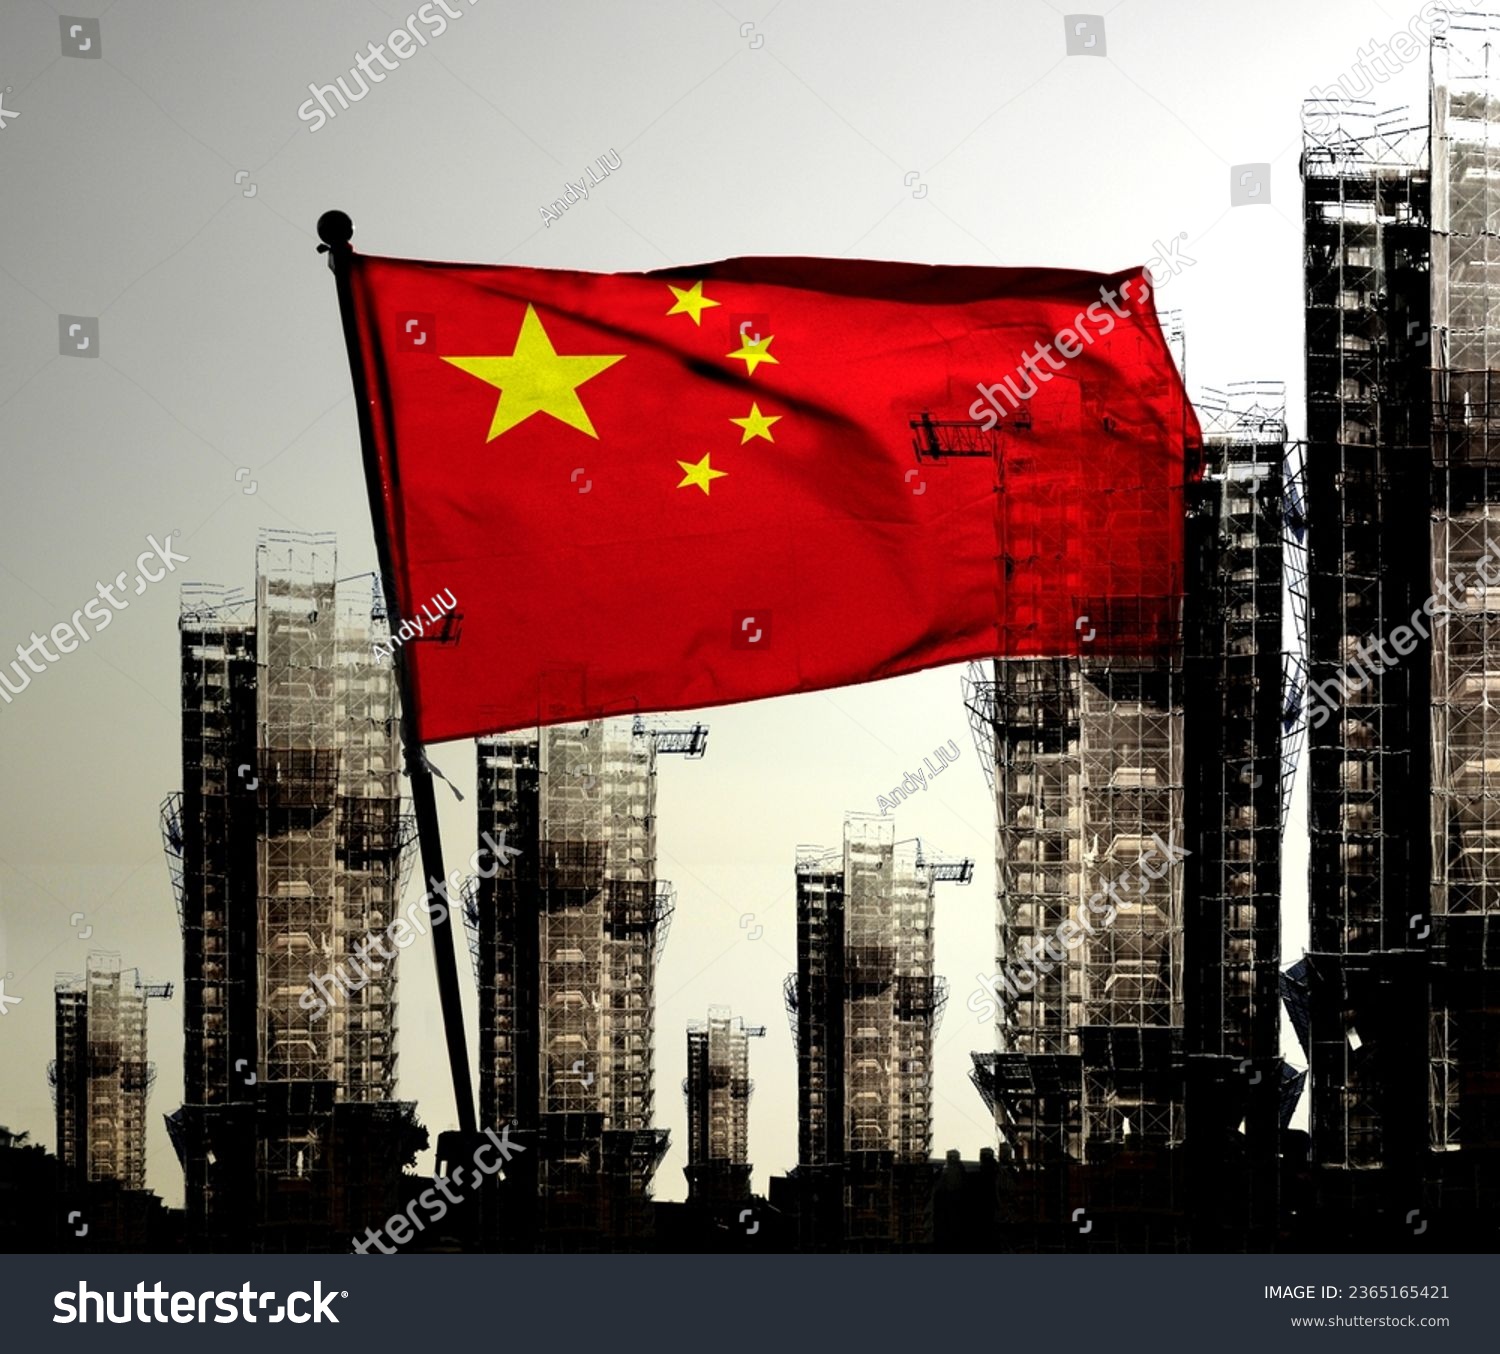 Double exposure creative hologram of unfinished supertall building and Chinese flag. Describe China's real estate collapse, bubble, financial turmoil, and China's Lehman storm      #2365165421